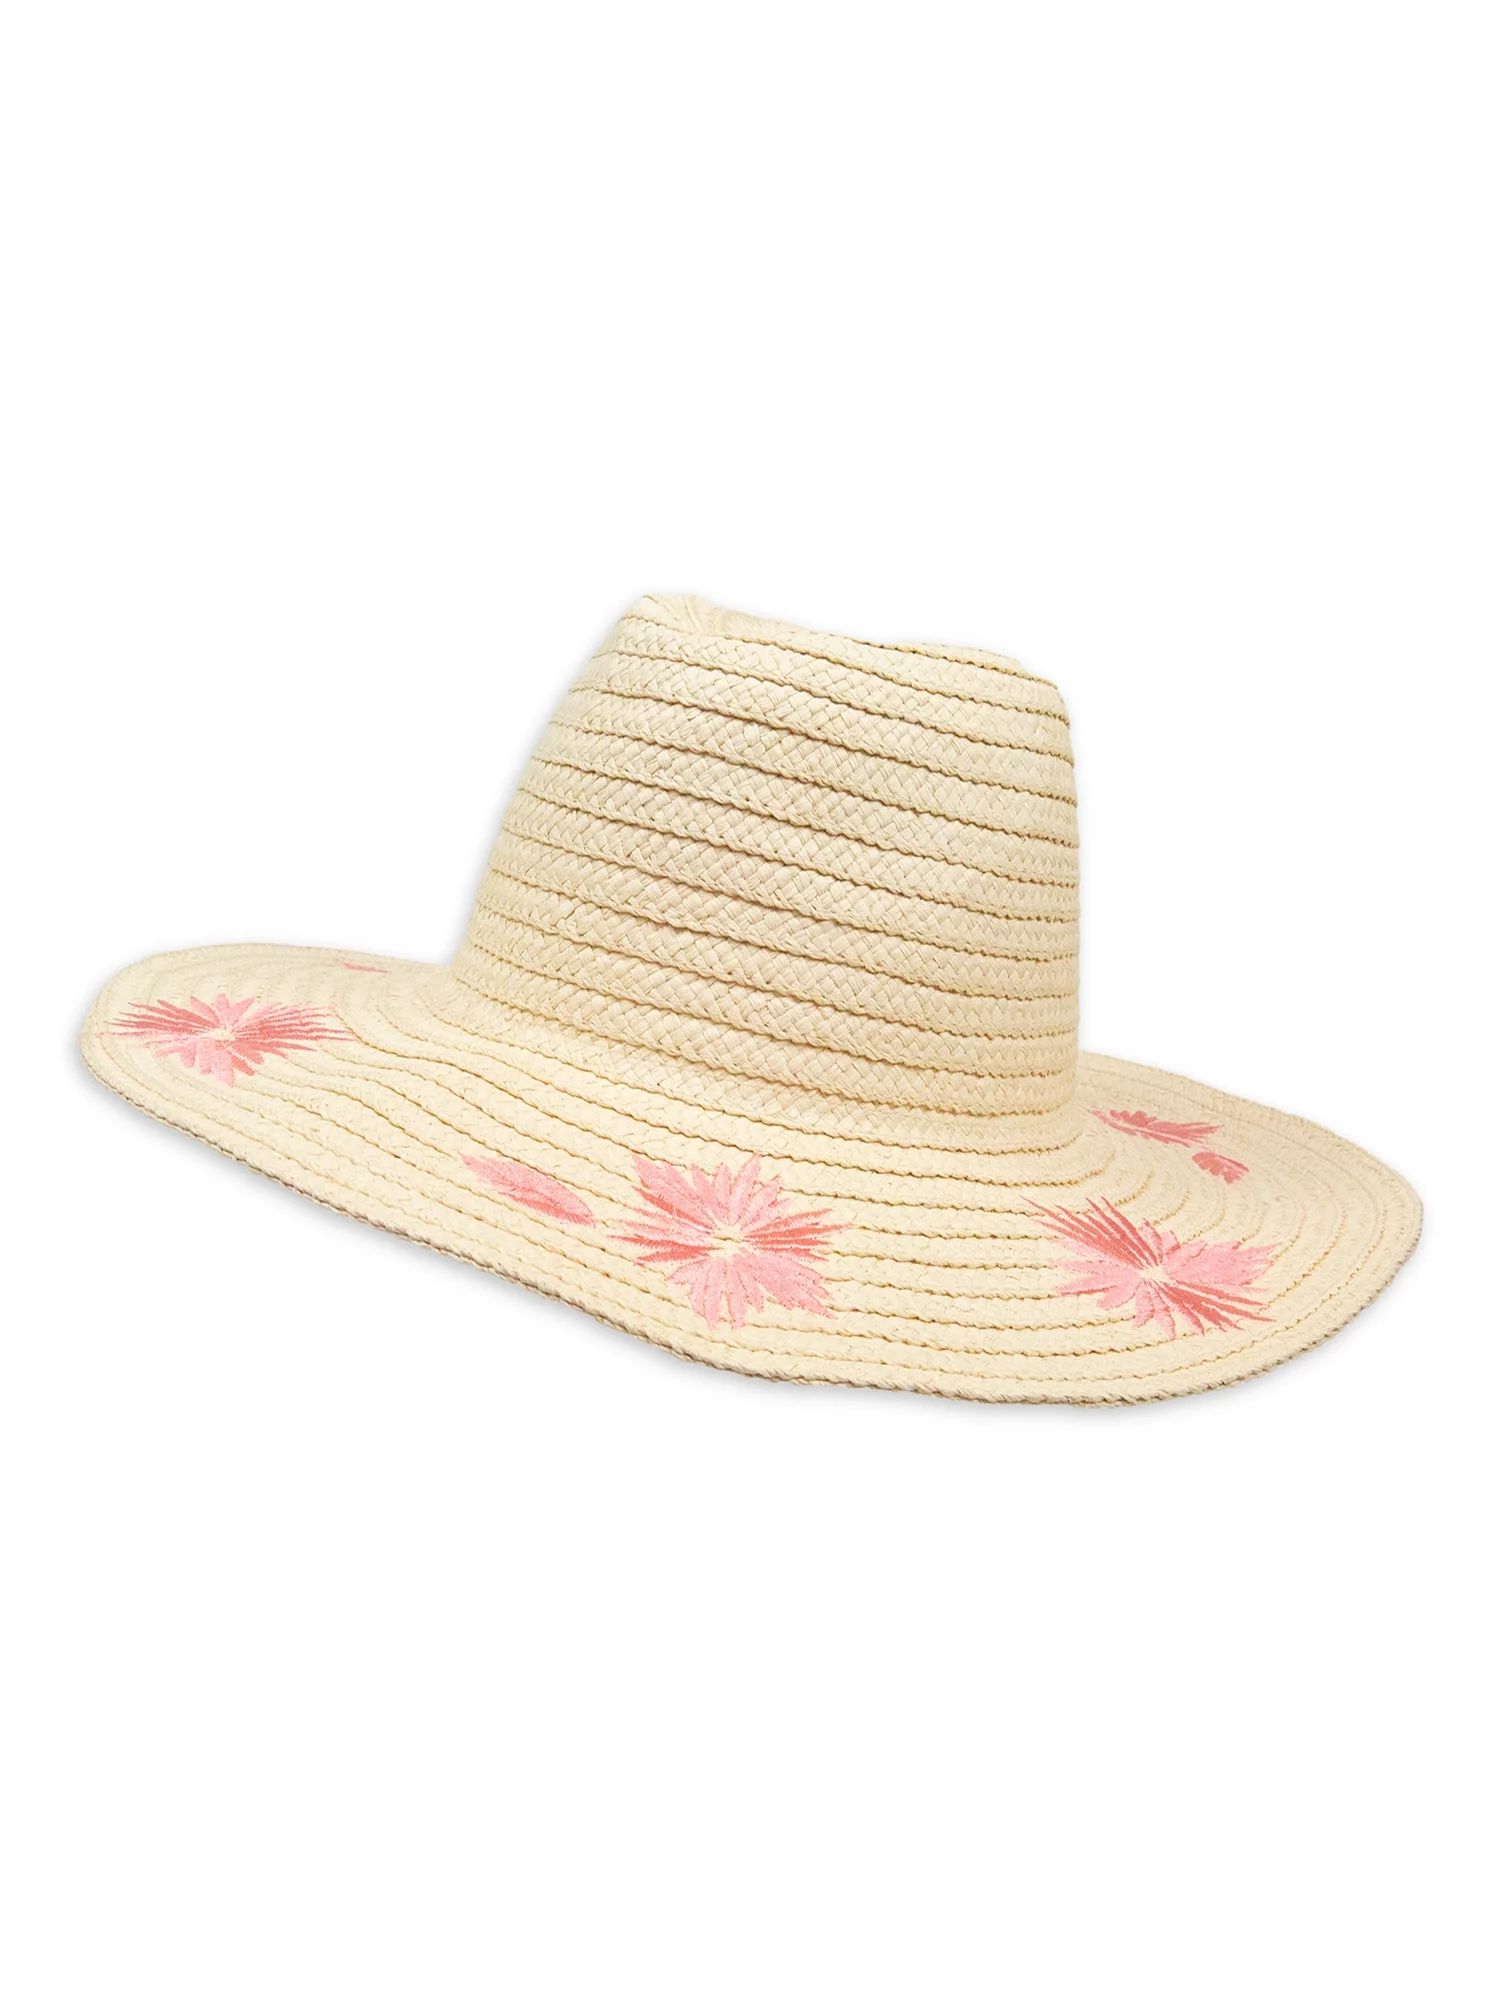 TIme and Tru Women's Embroidered Straw Hat, Brown | Walmart (US)